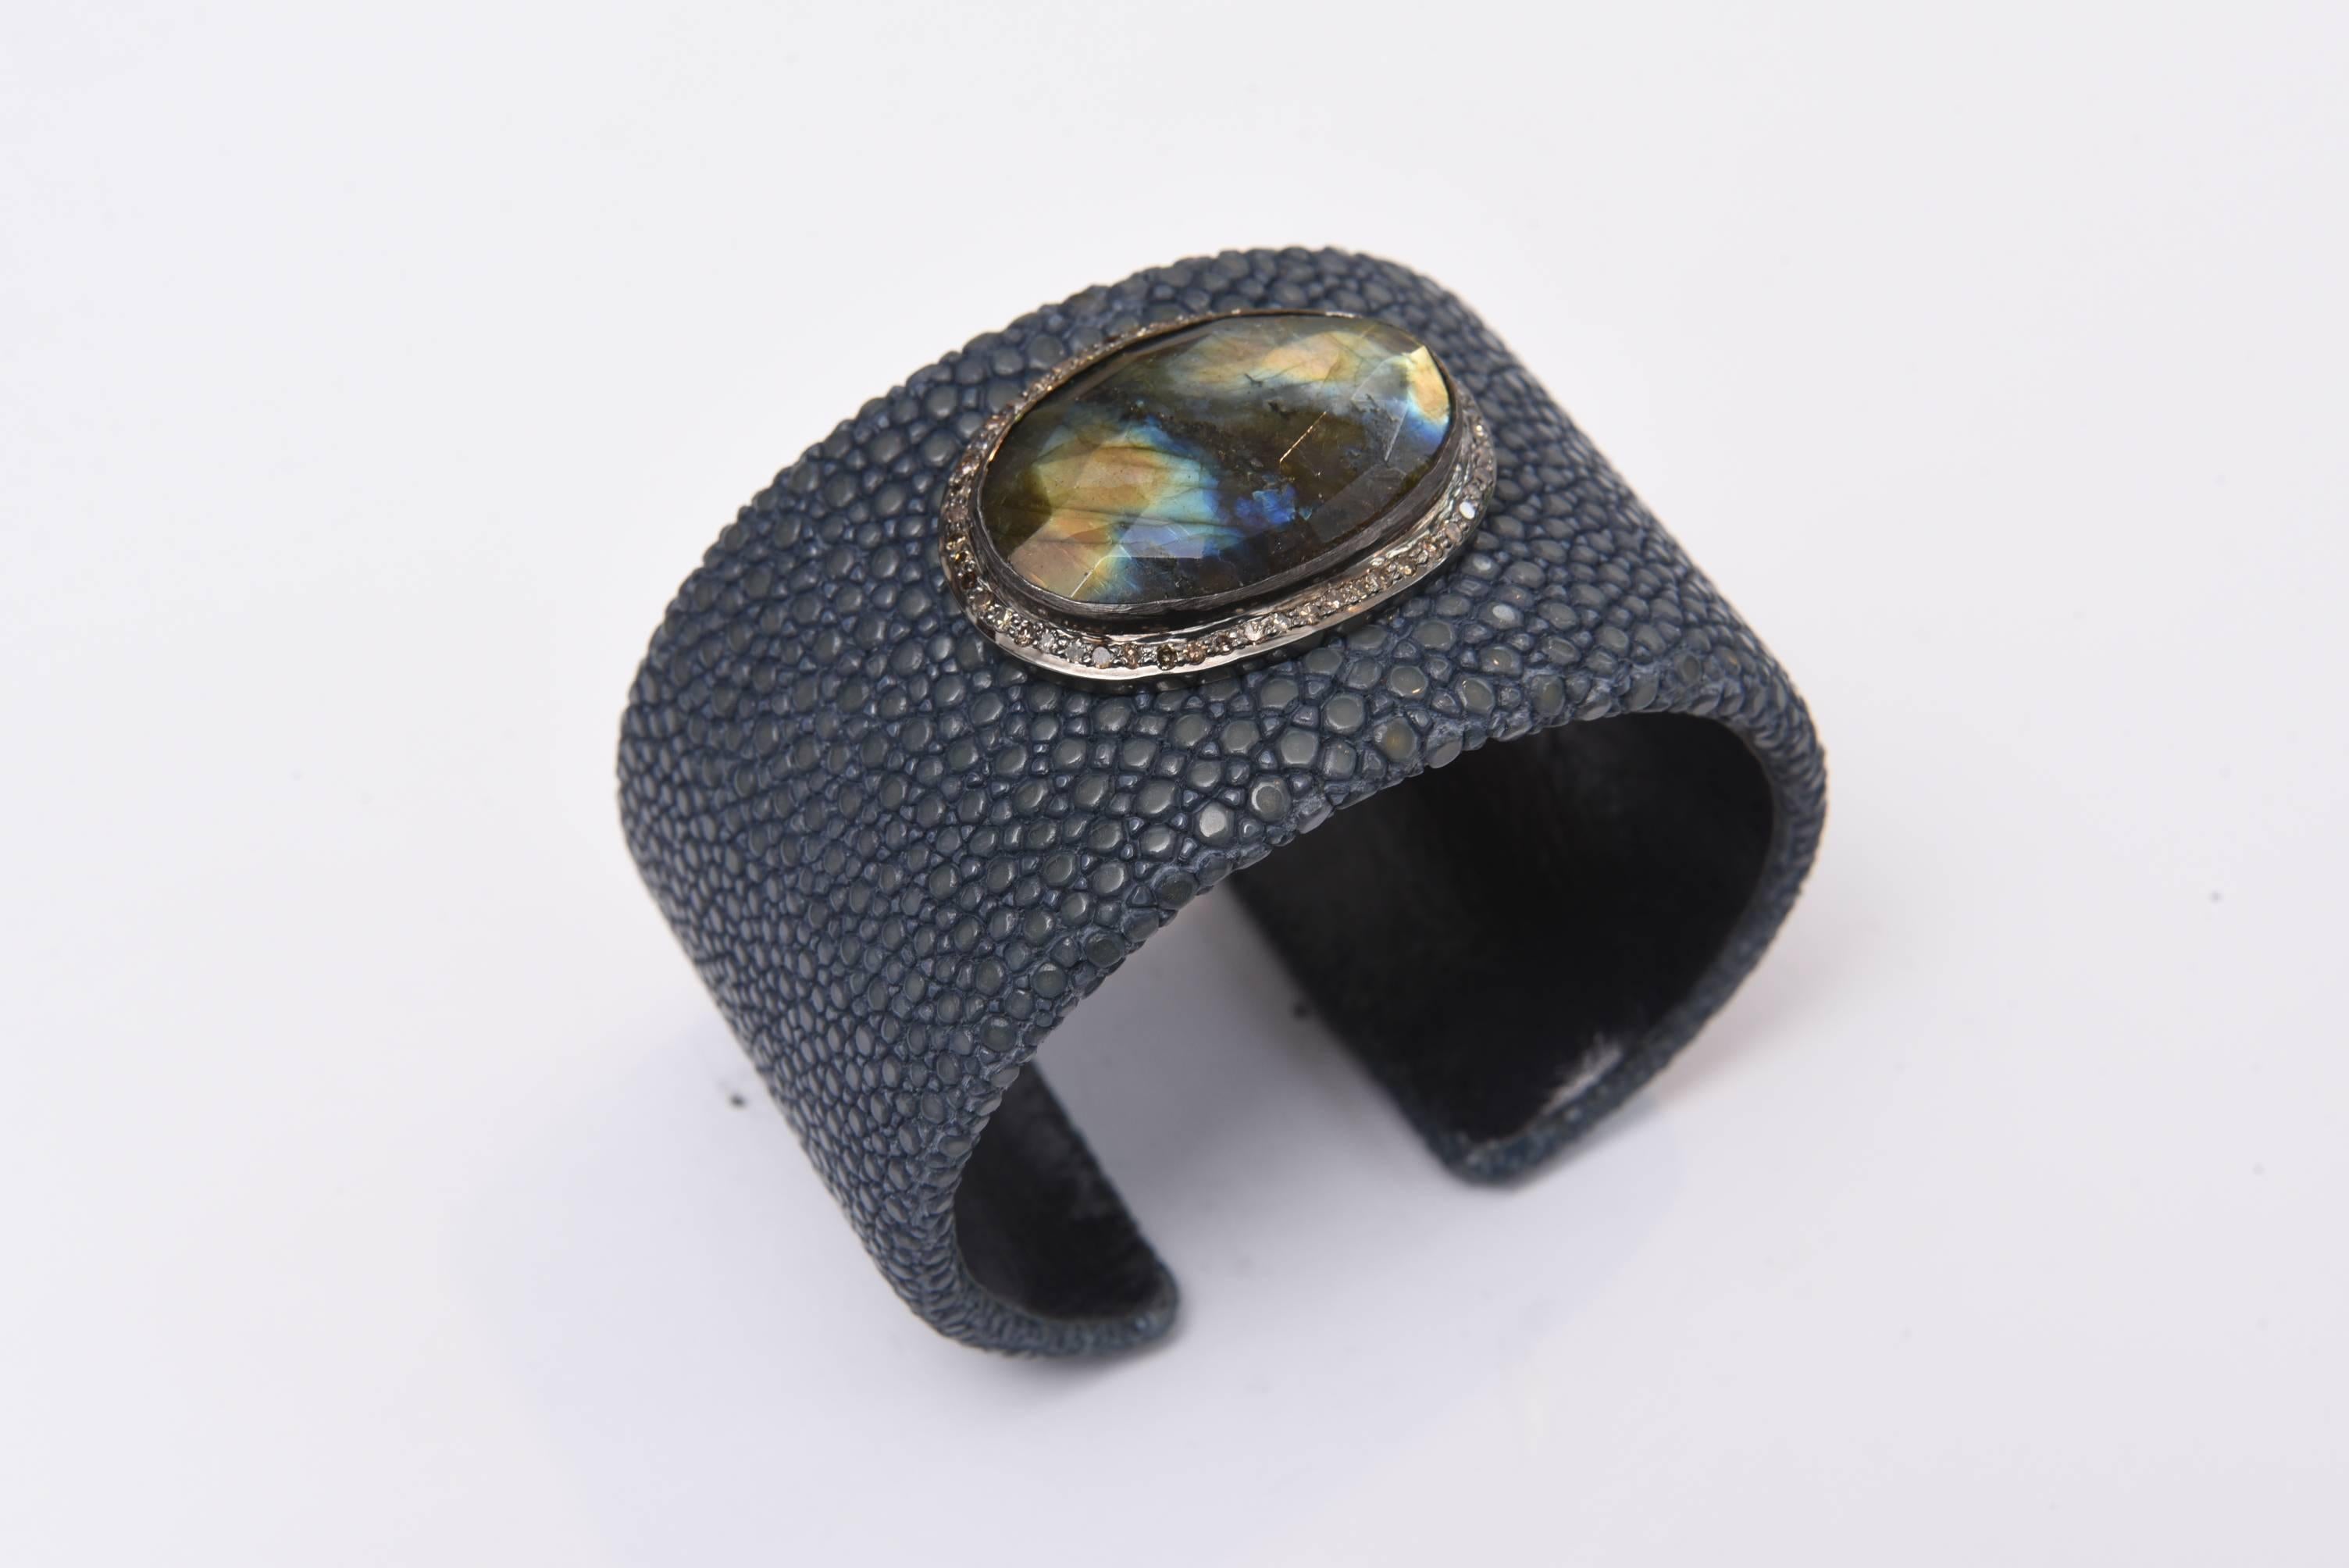 A stunning cuff bracelet made of shagreen (sting ray) in a gray/blue color with a large rosecut labradorite stone on top set in sterling silver with diamonds around the border.  The labradorite has fantastic life and iridescence.  Carat weight of